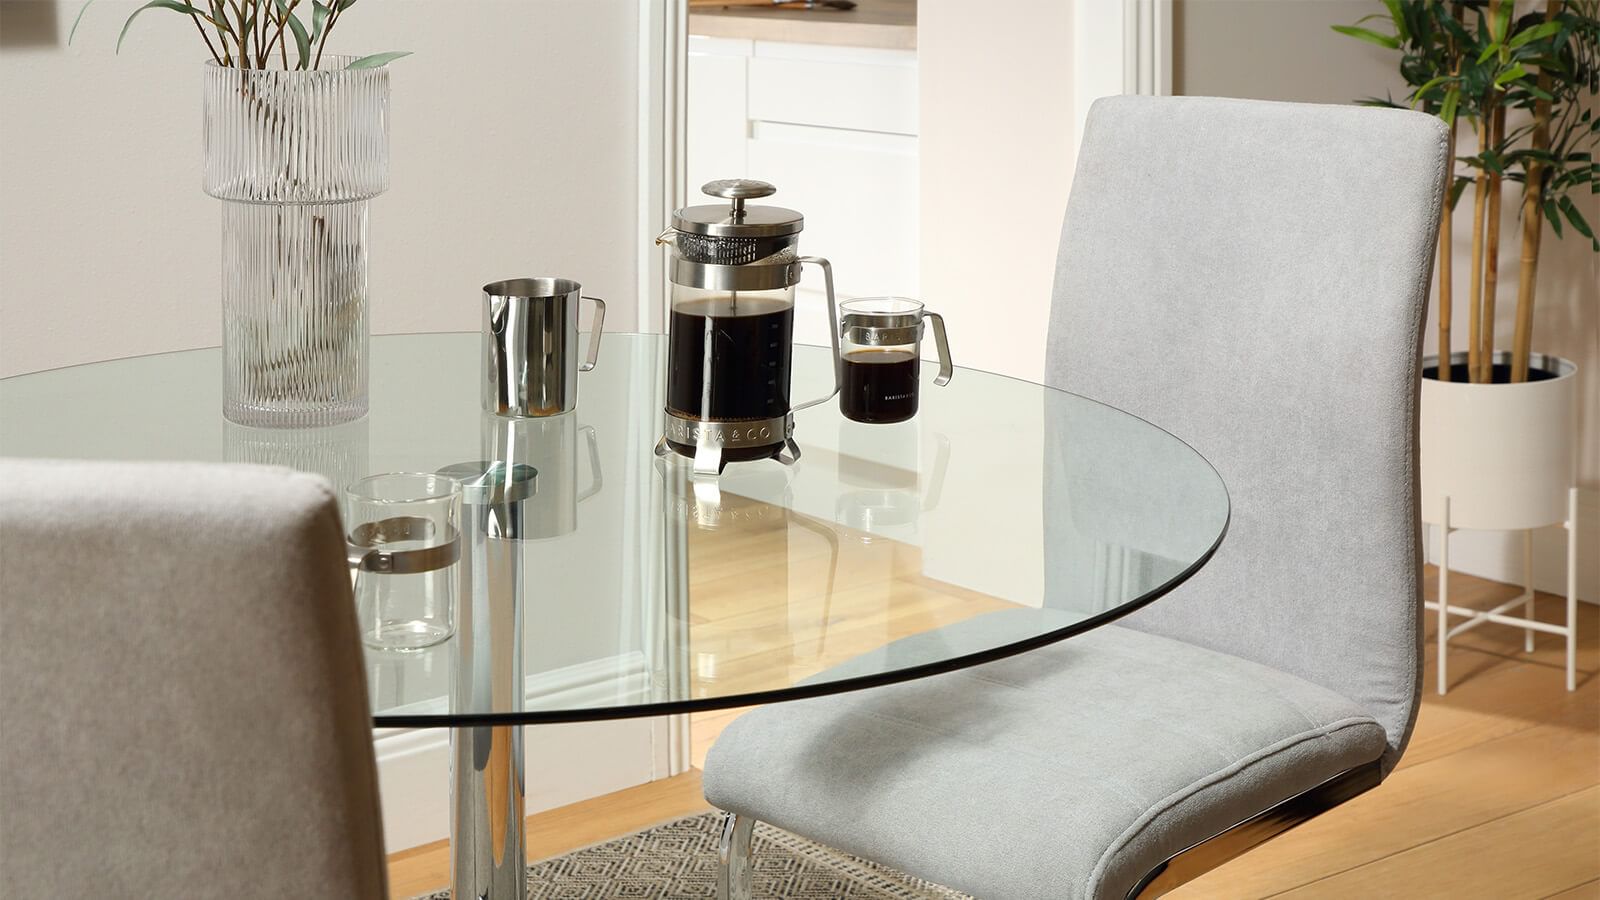 https://www.furniturechoice.co.uk/v5/img/hier/advice-and-inspiration/banner-how-to-clean-your-glass-dining-table-l.jpg